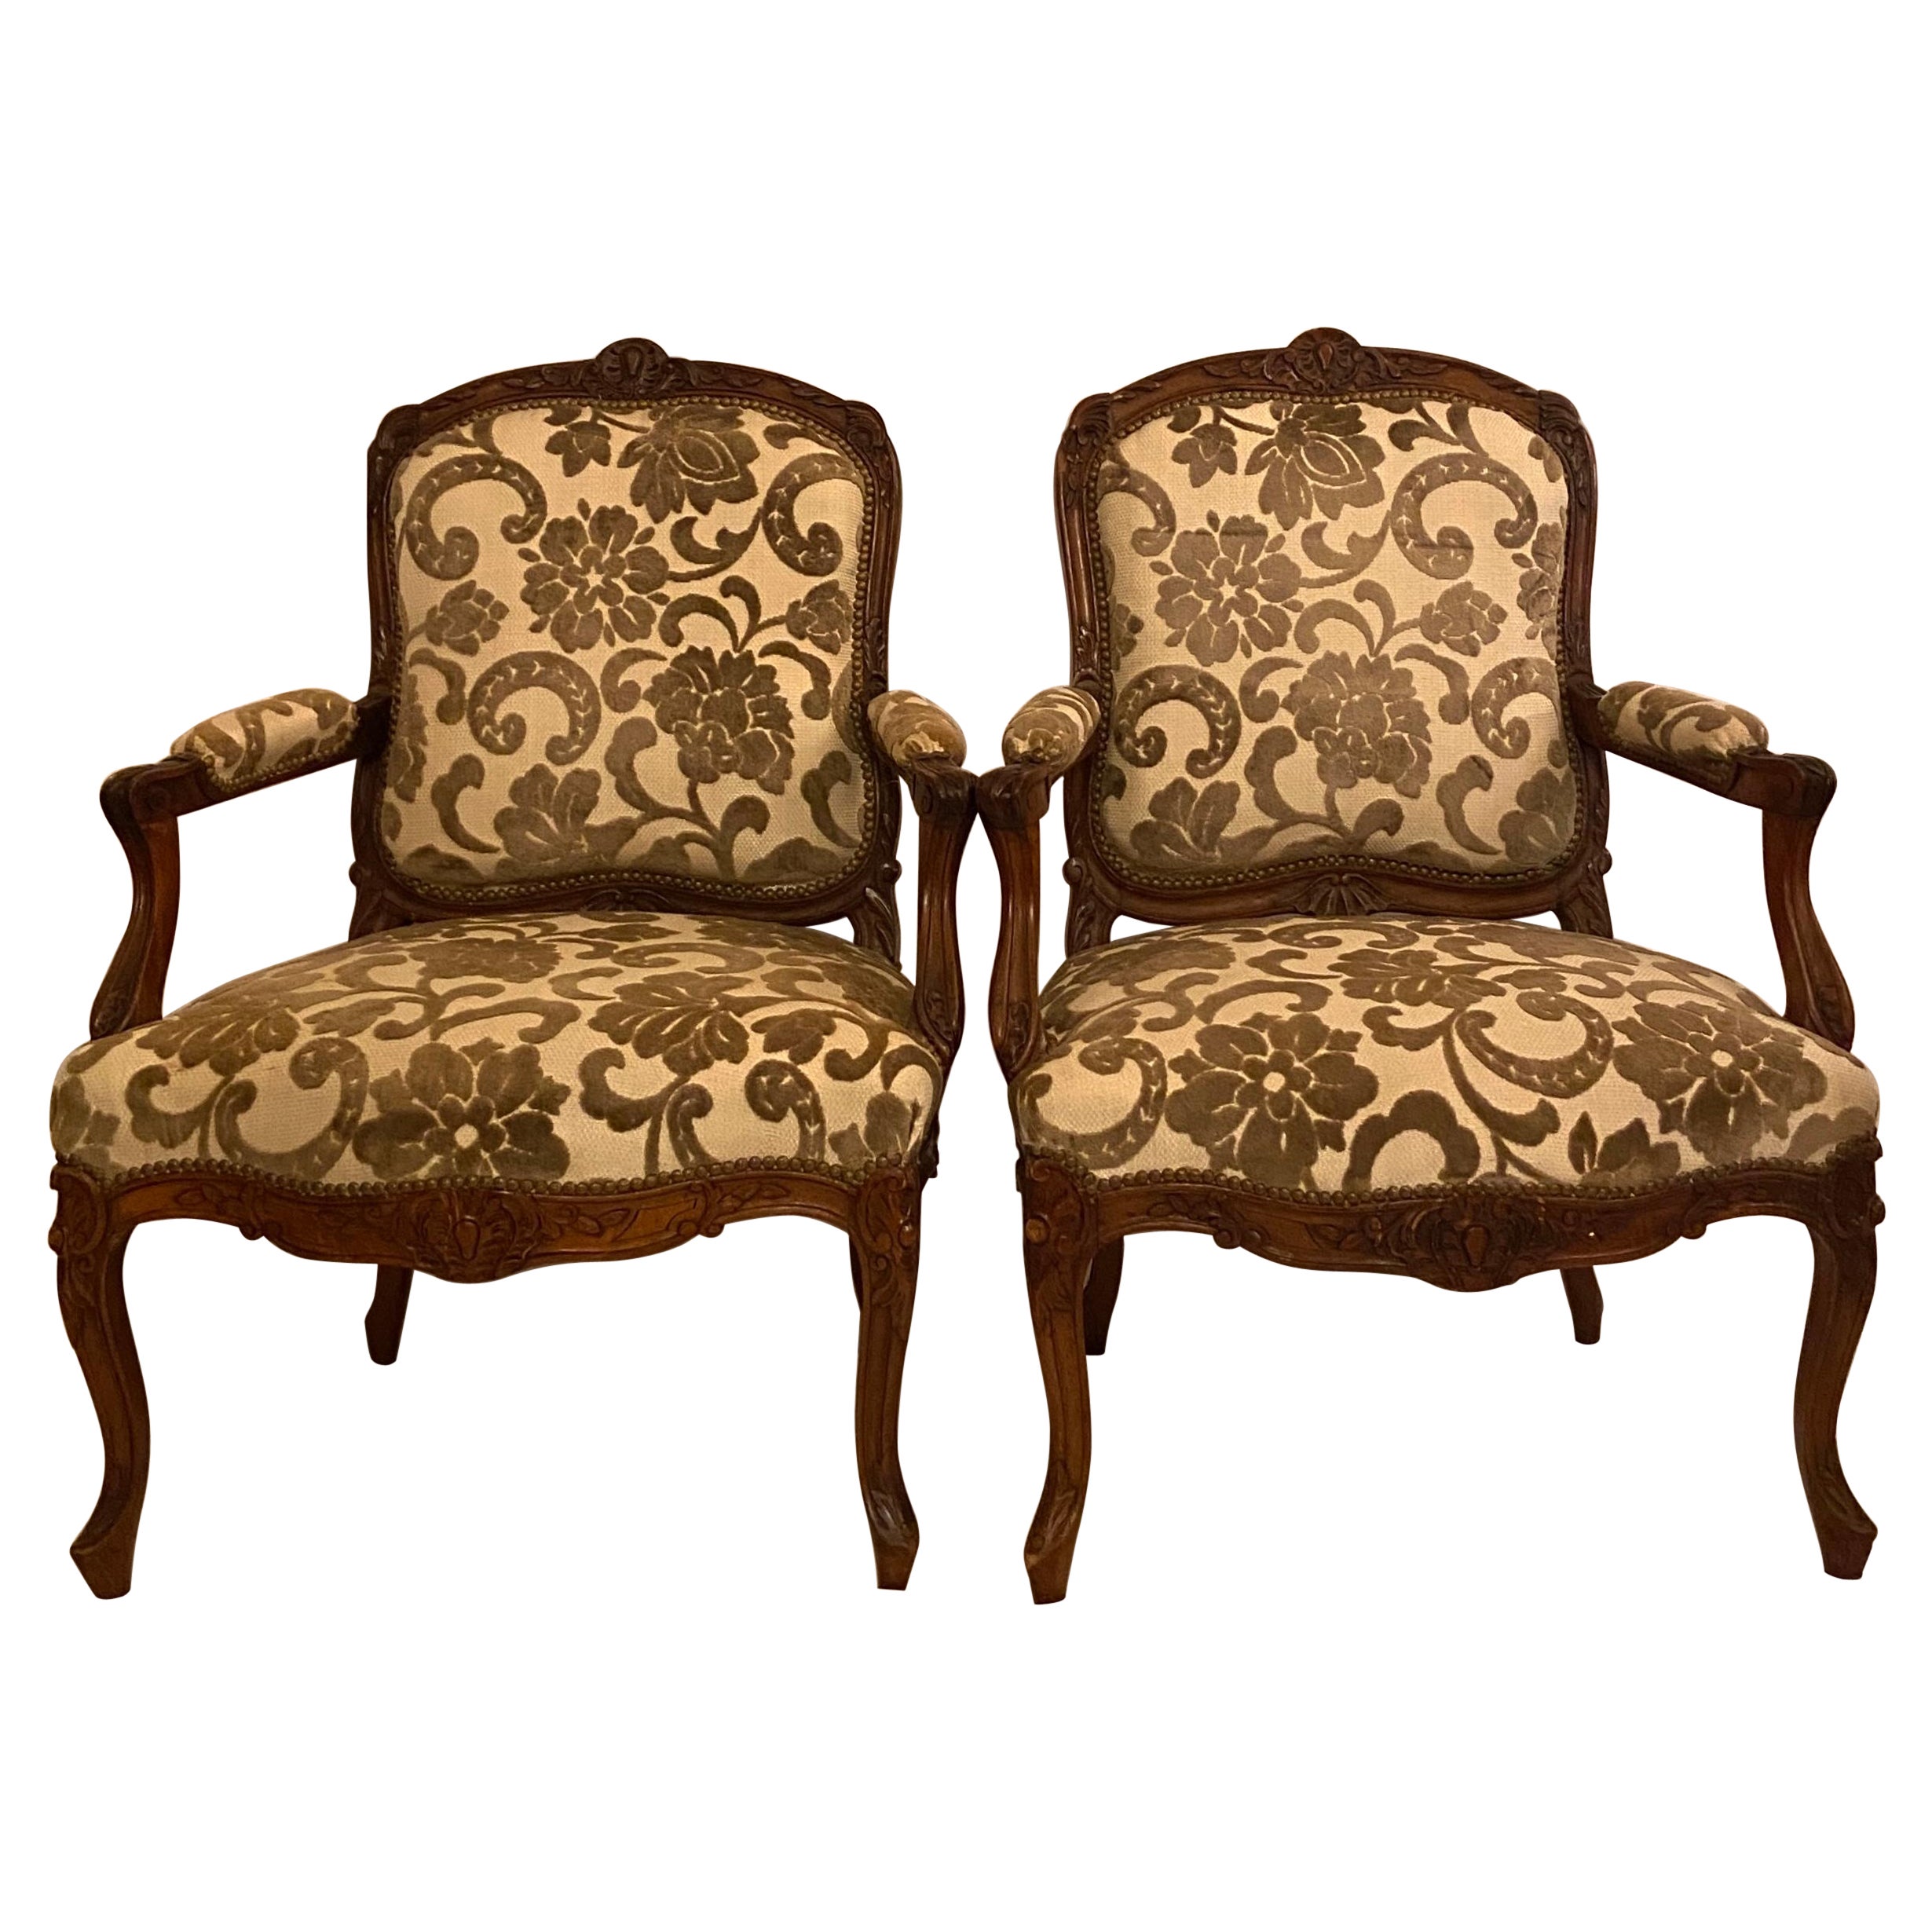 Pair of Antique French Carved Walnut Upholstered Armchairs, circa 1860 For Sale